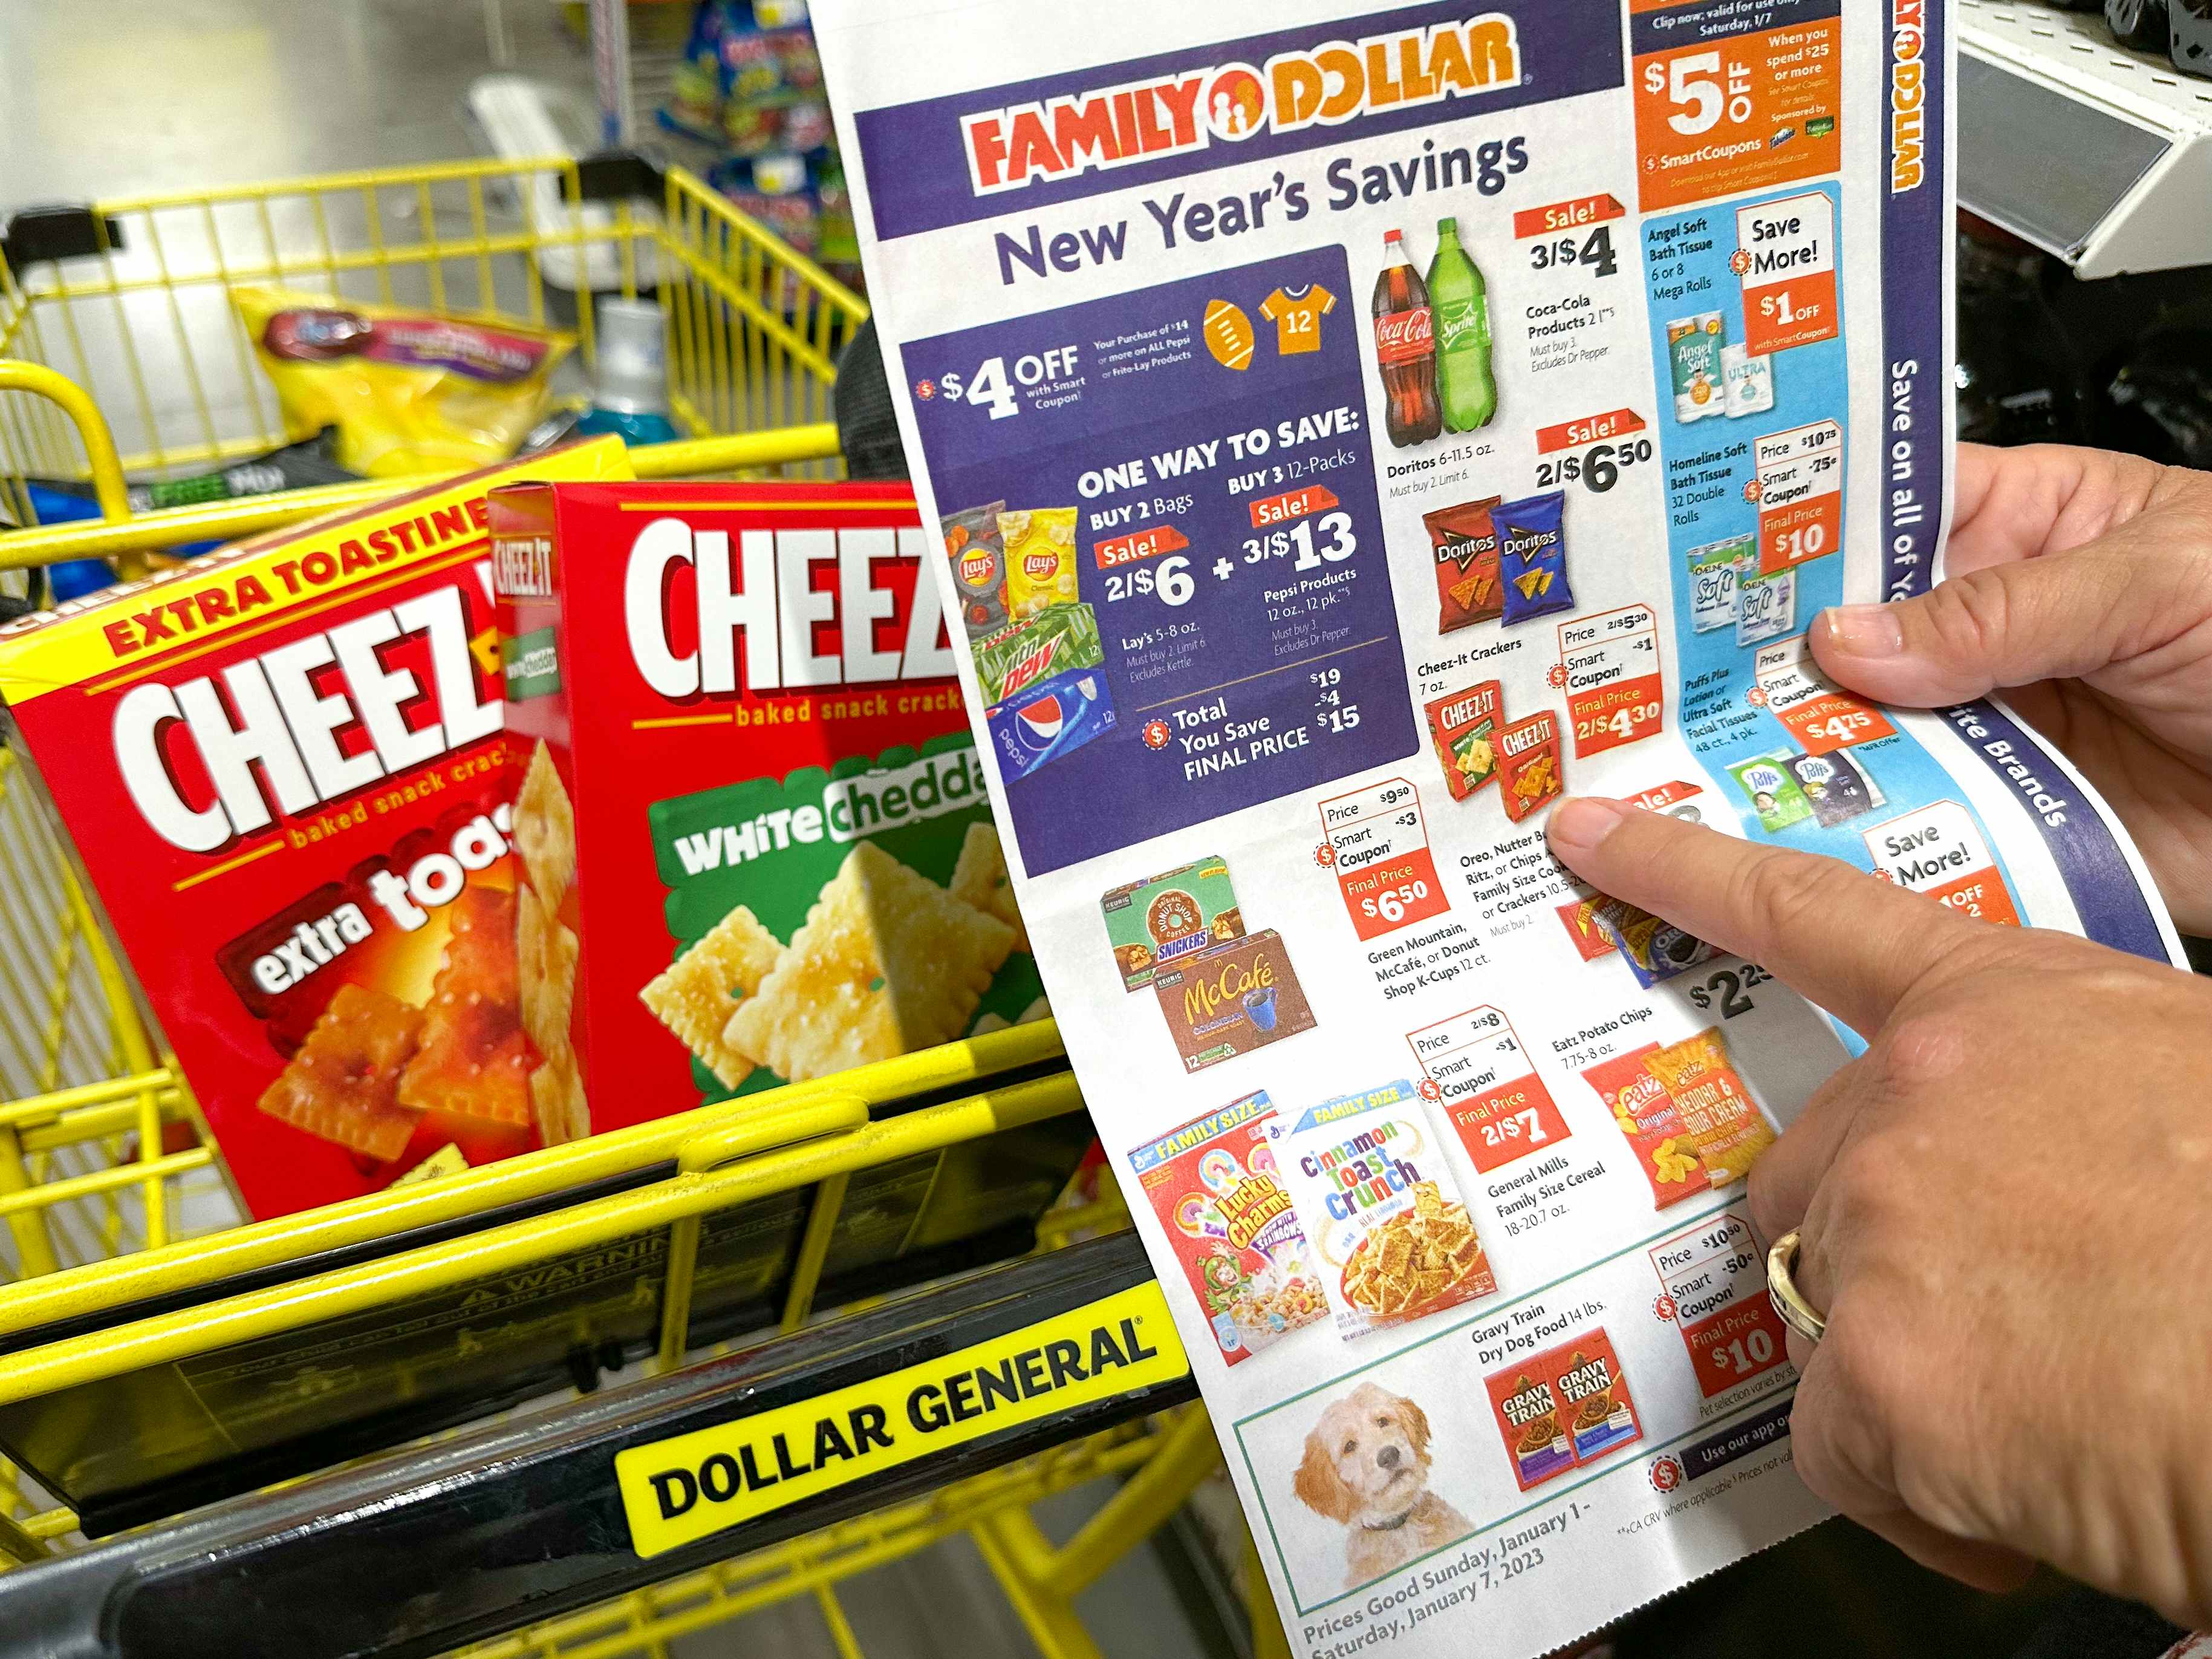 Someone pointing to a deal on a Family Dollar ad next to same products in a Dollar General cart